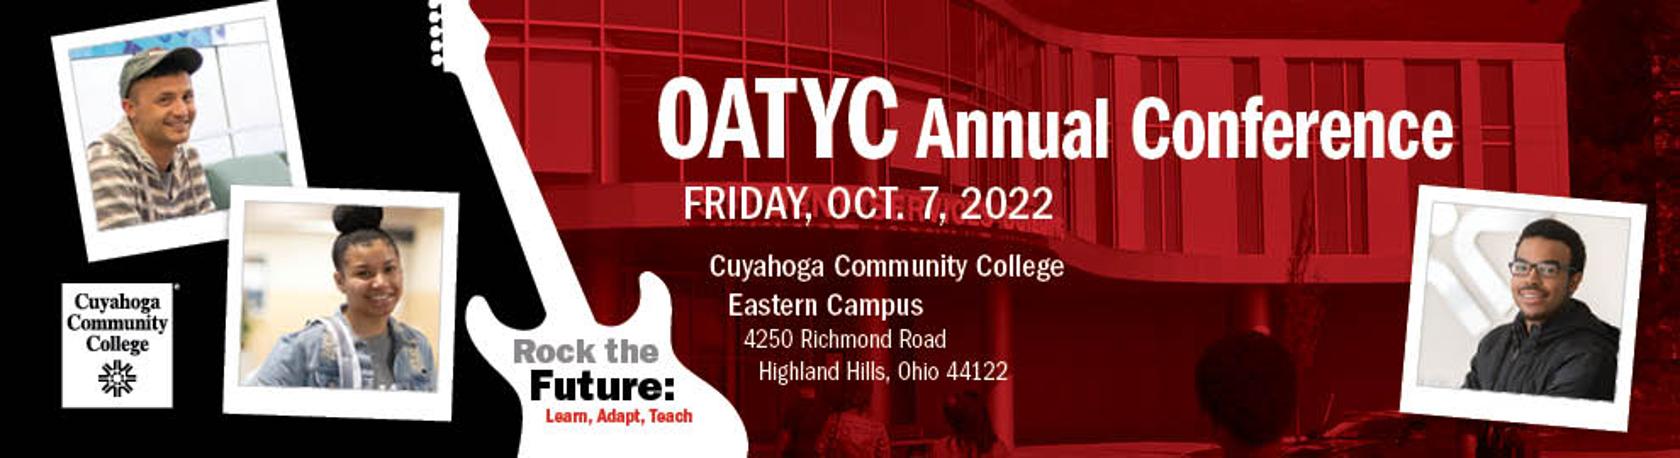 OATYC Conference Save the Date October 7, 2022